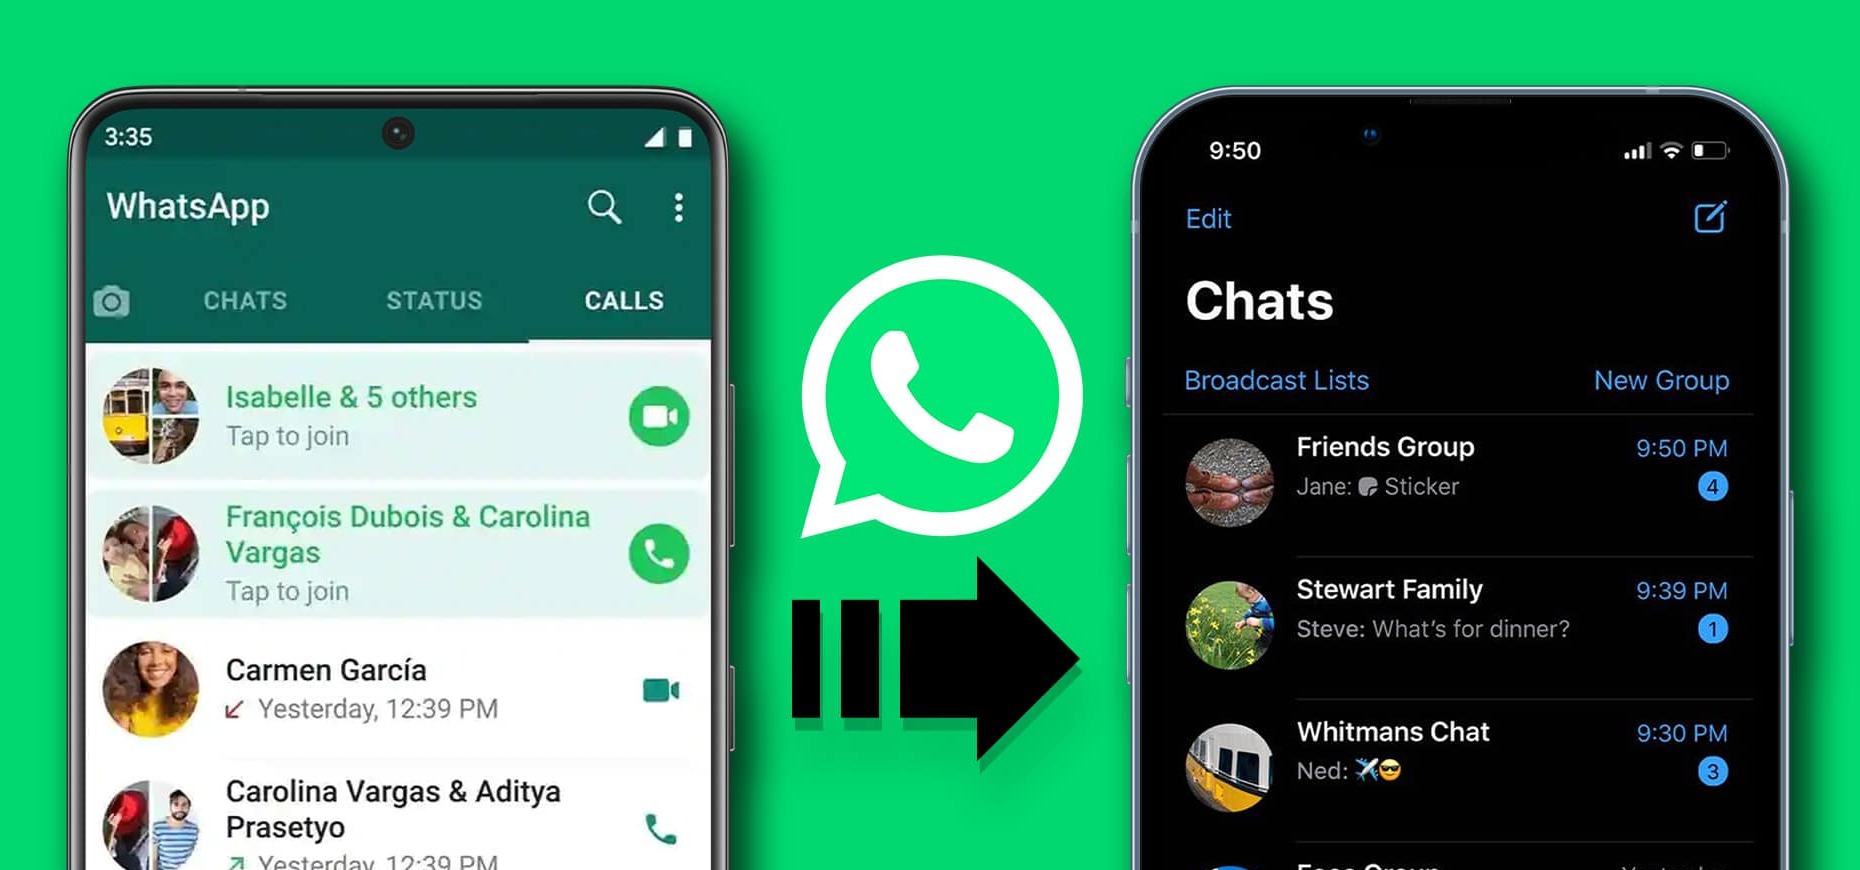 How To Move Whatsapp From Android To Iphone